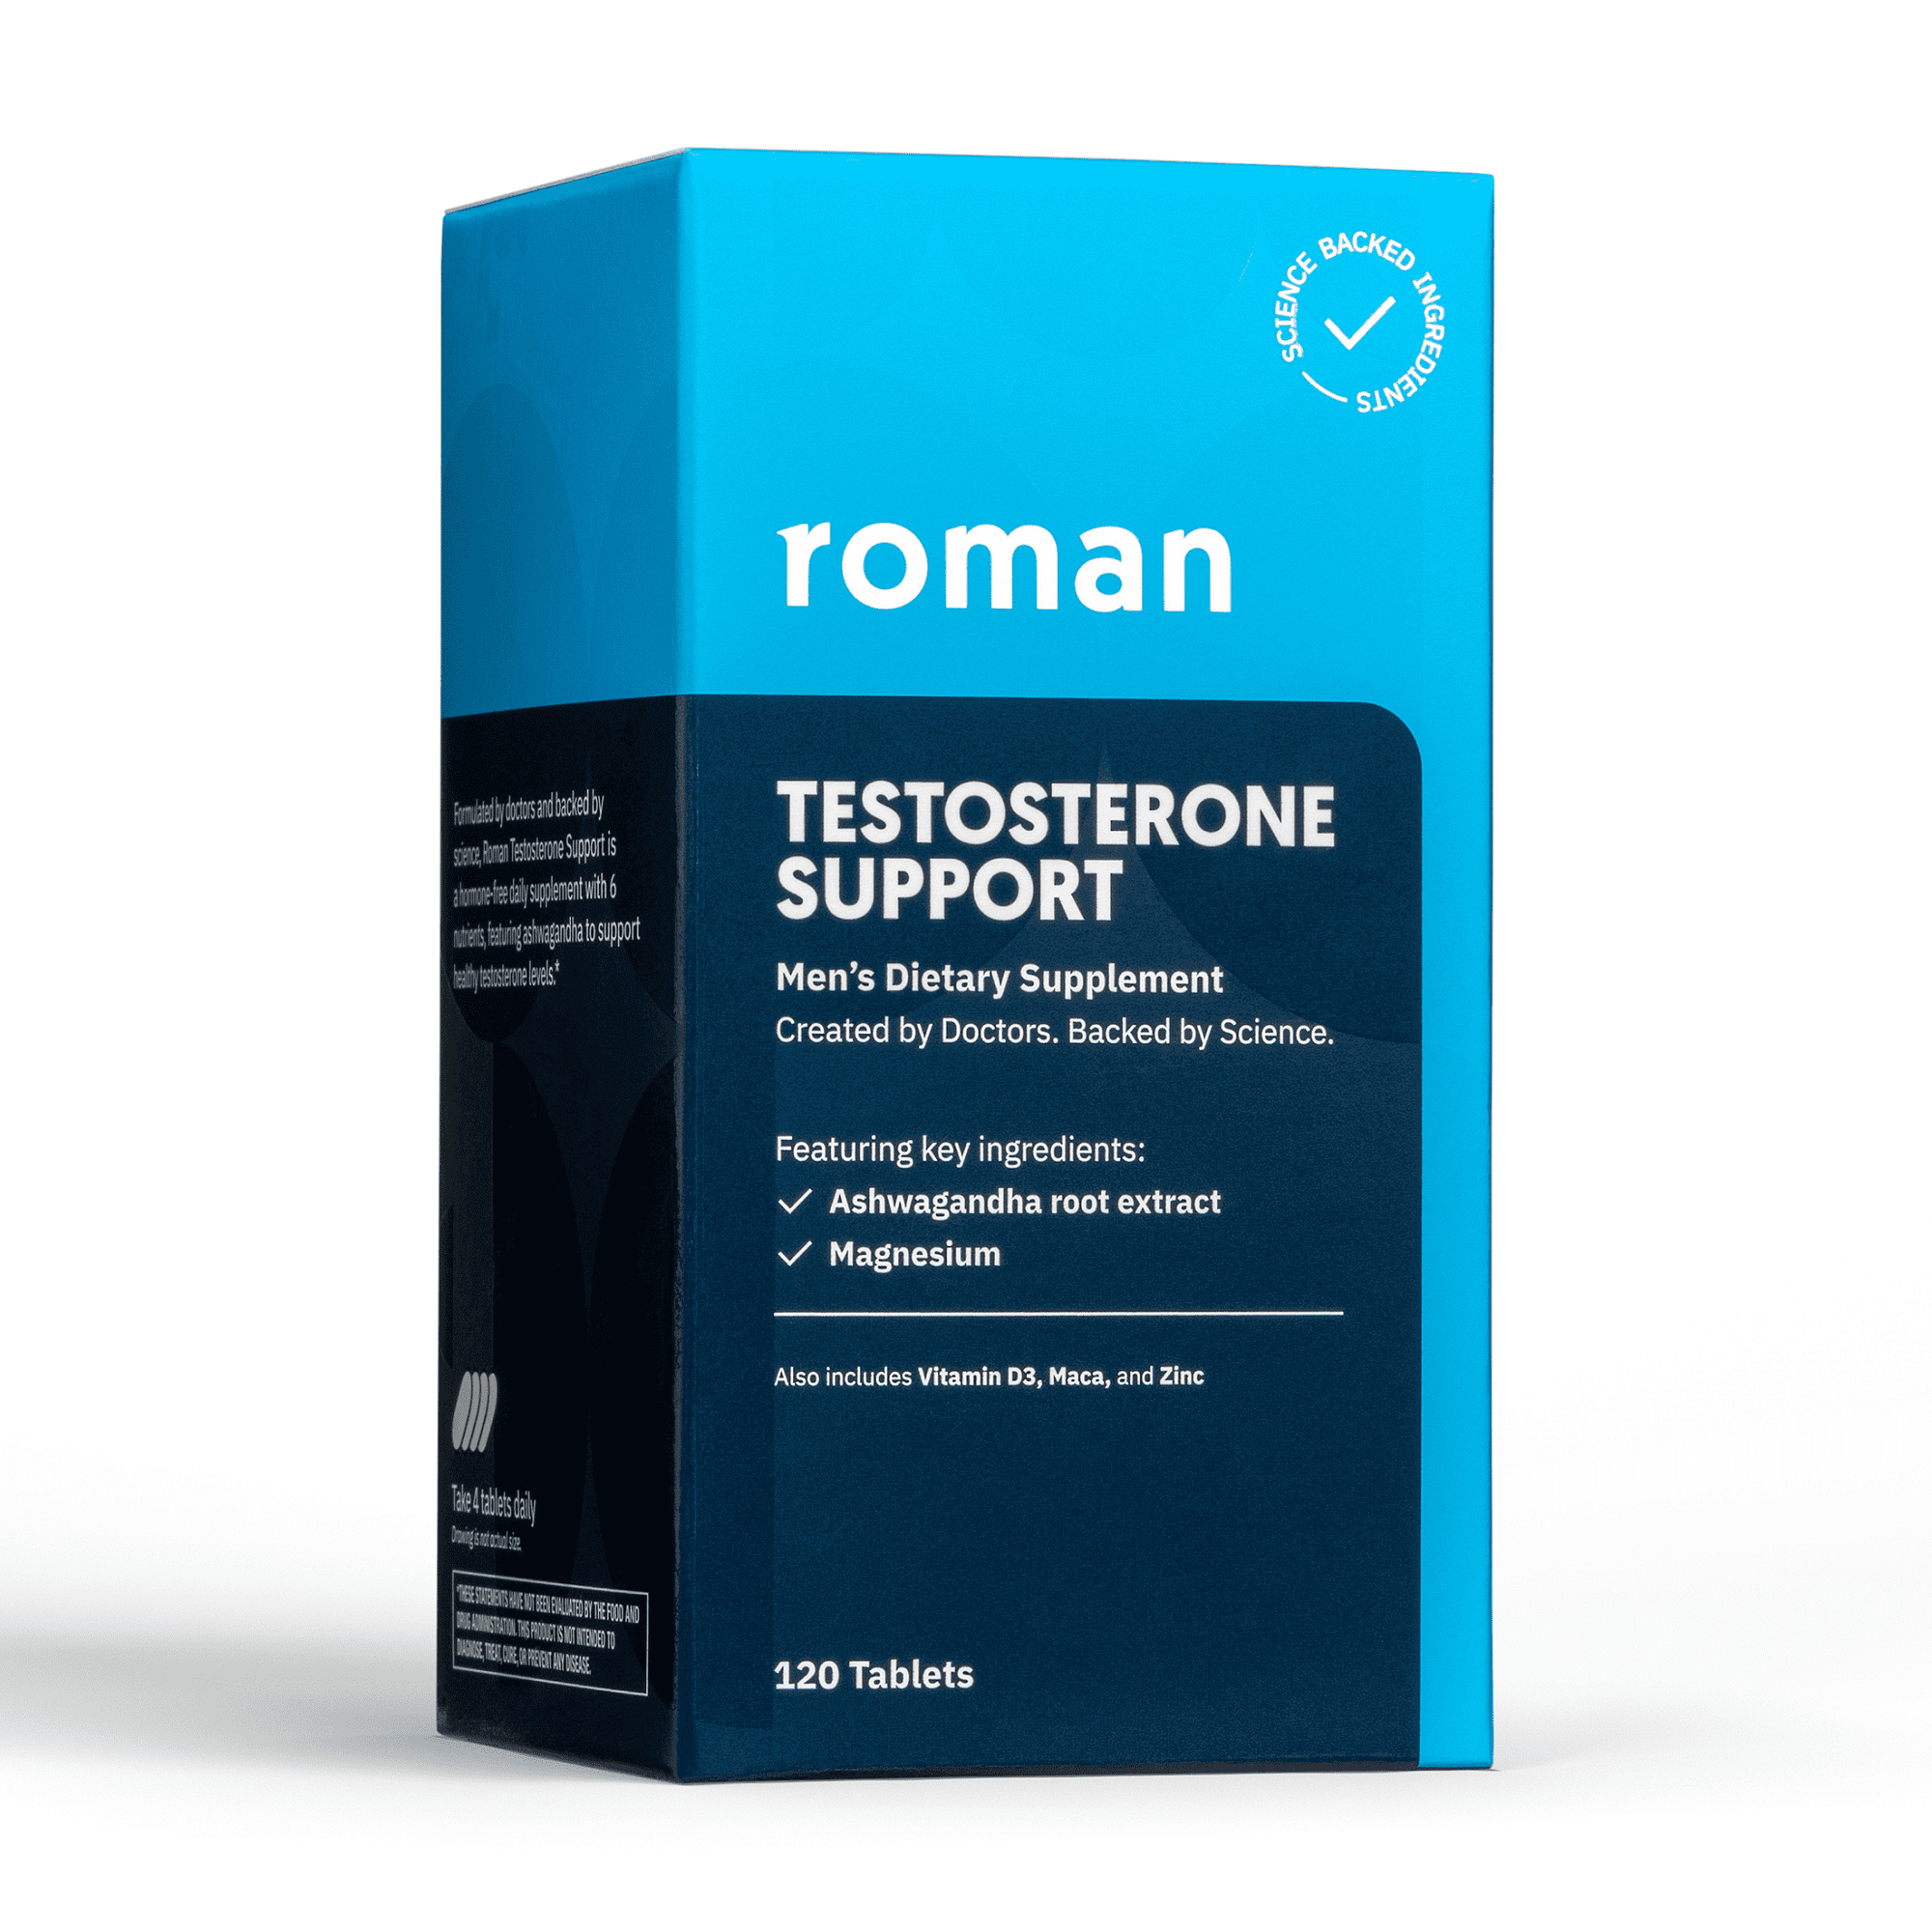 Roman Testosterone Support Supplement for Men with Vitamin D3, 120 Tablets